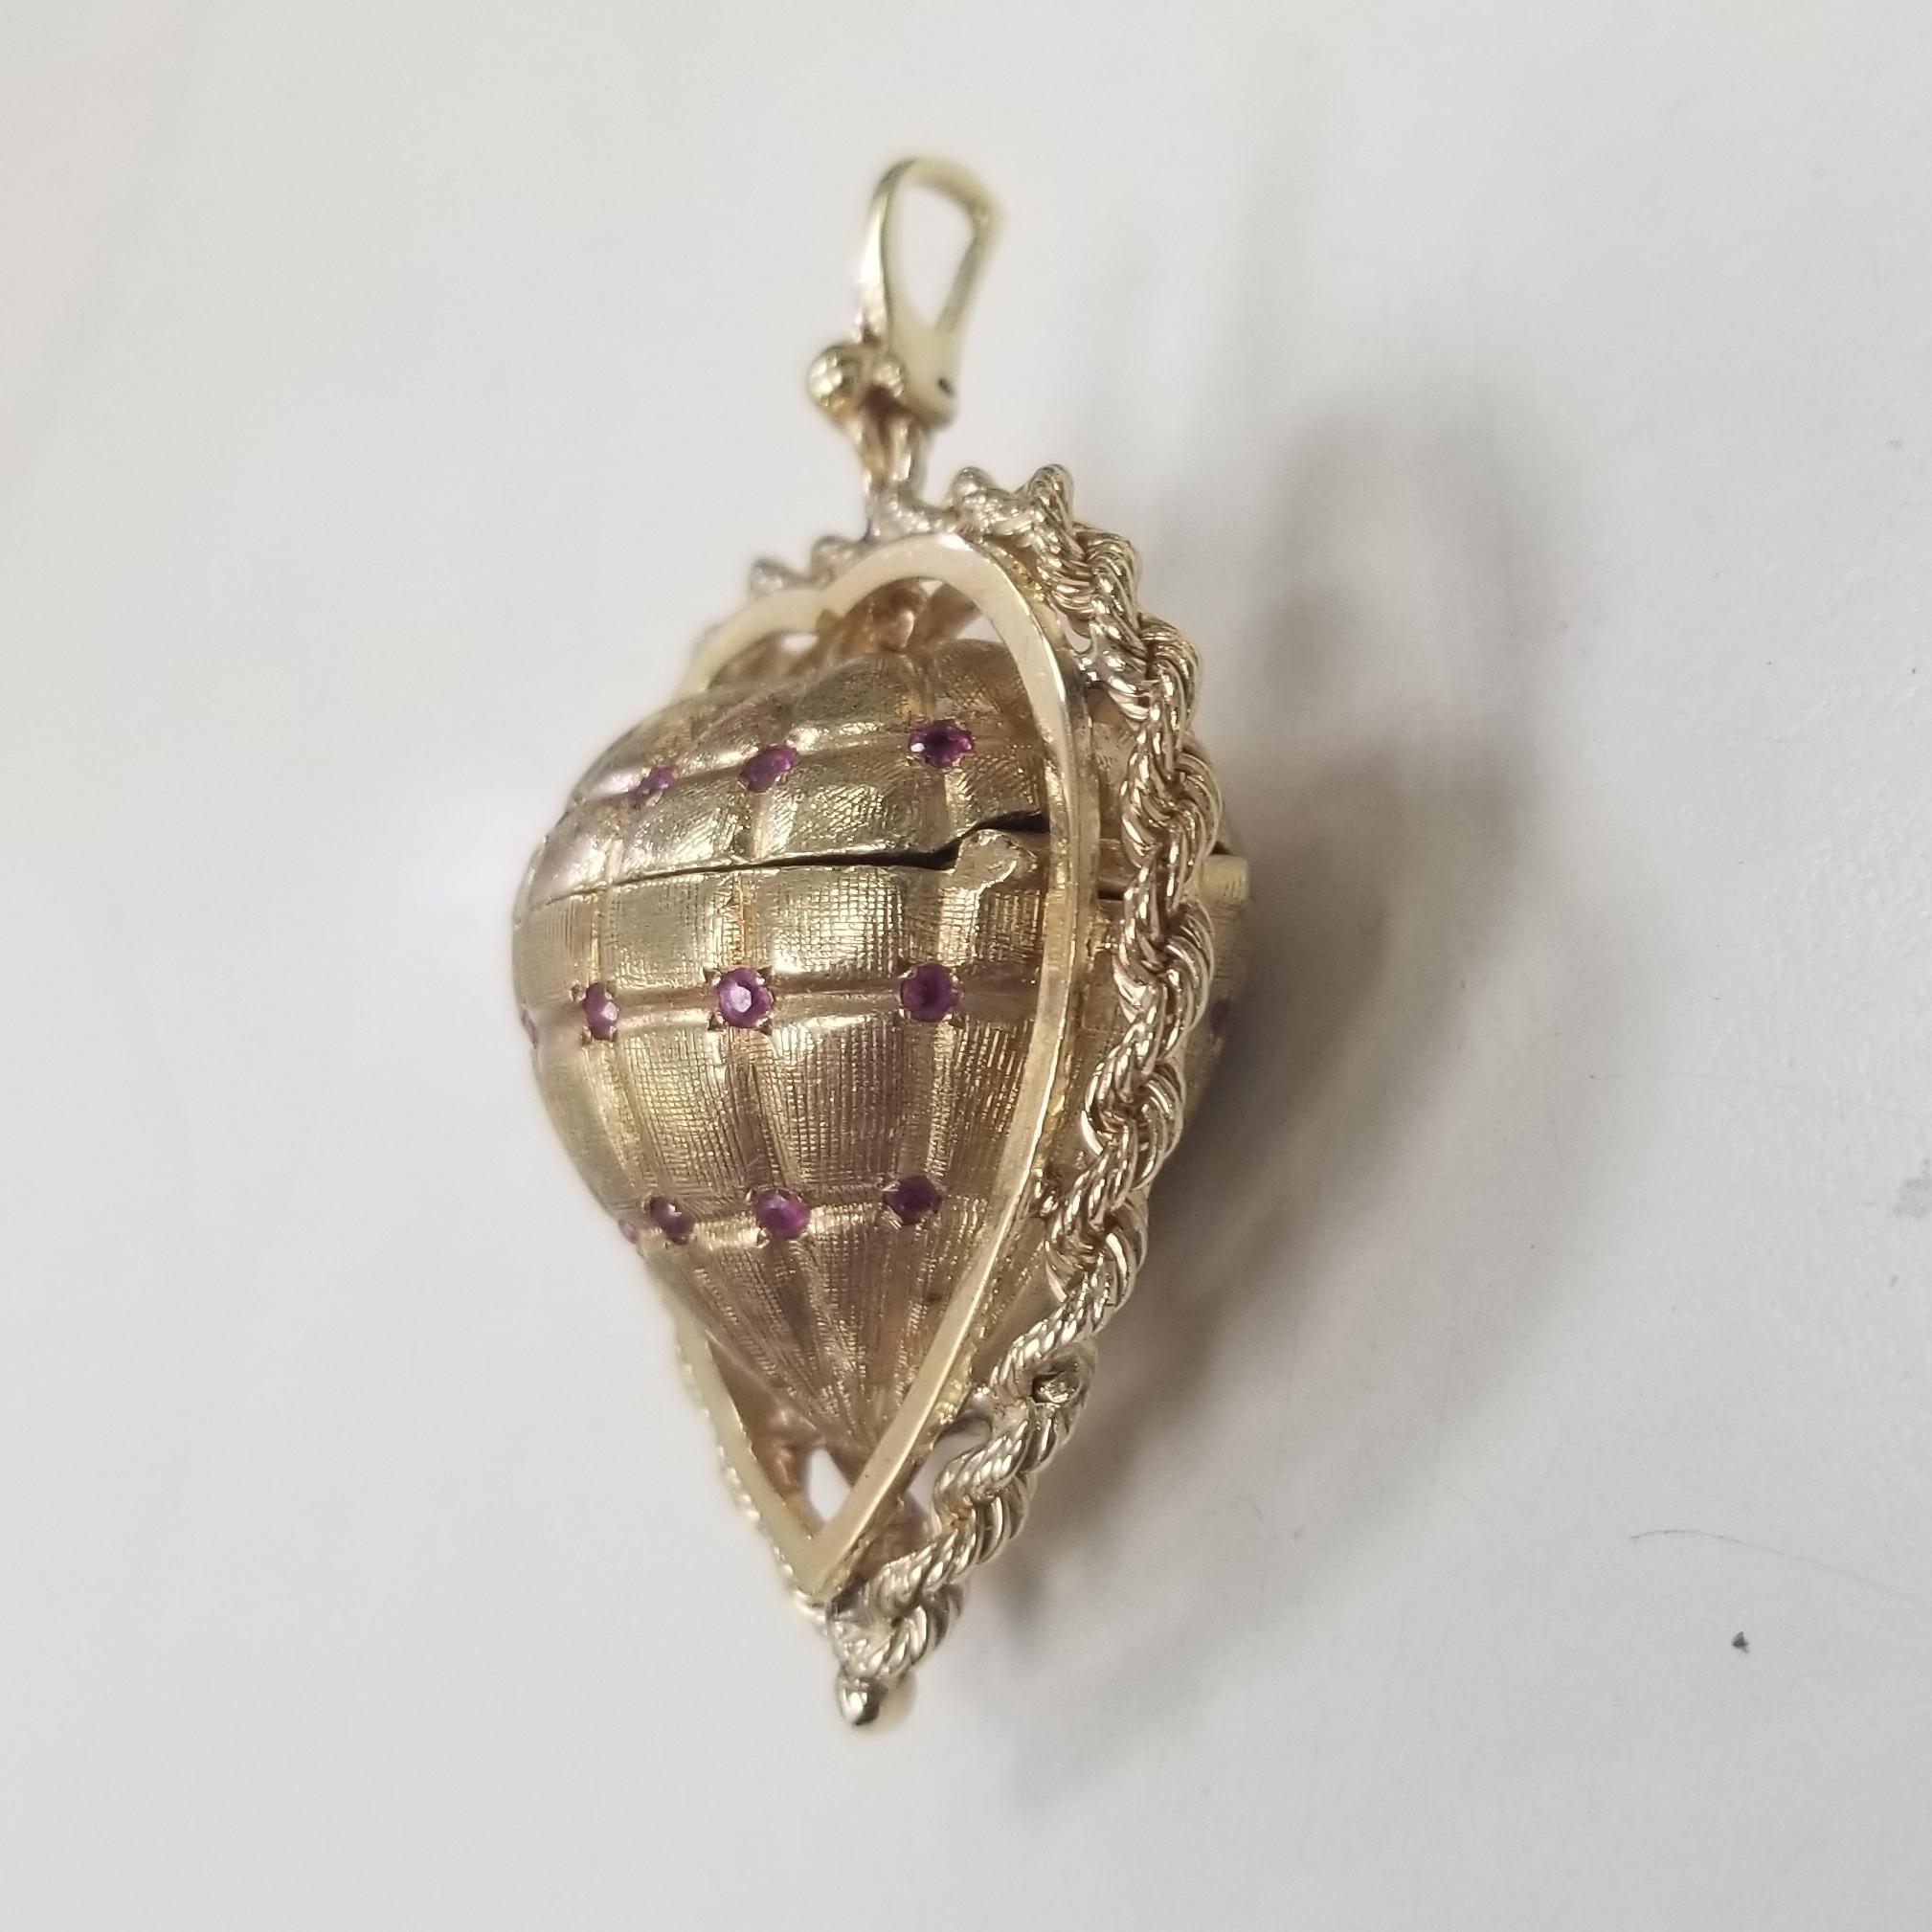 1950's 14k yellow gold Heart pendant locket that holds 3 pictures inside with rope trim.  
Item specifics
Condition:Pre-owned:
Seller Notes:“GREAT CONDITION”
Type: Pendant-Locket
Main Stone Color: 30 Rubies .45pts.
Metal Purity:14k
Metal:Yellow